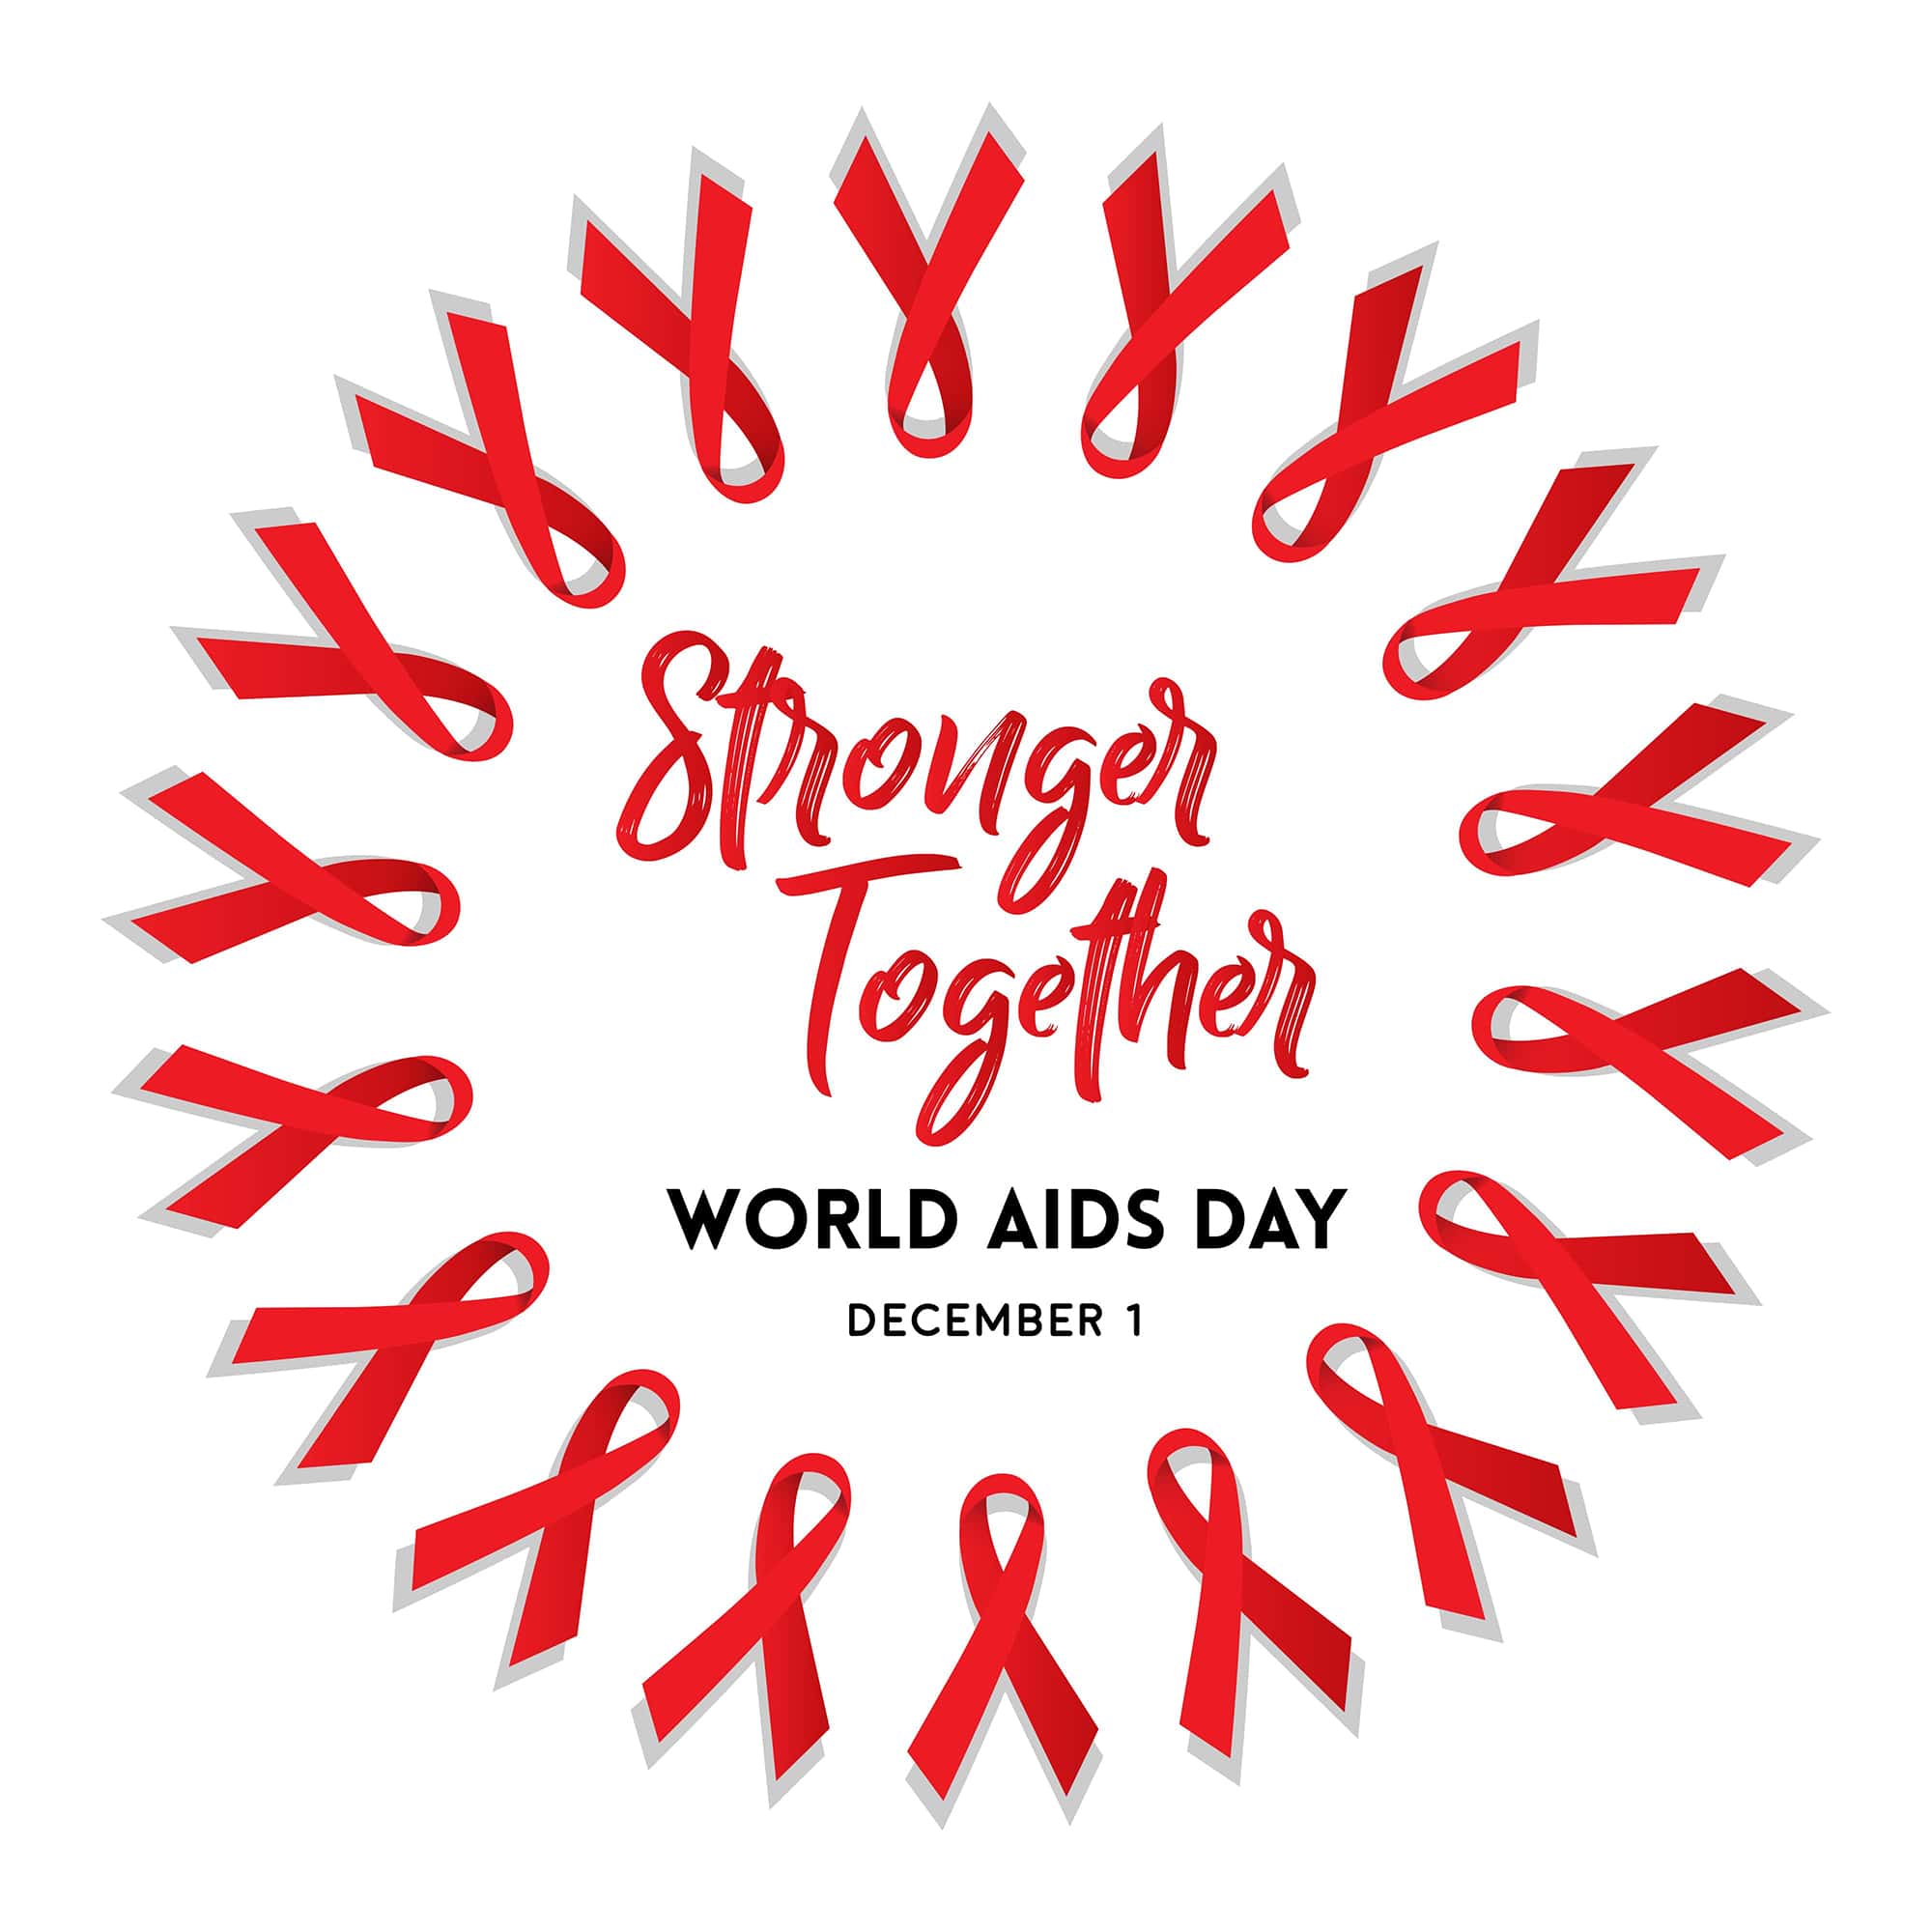 Stay Stronger - Download free Awareness poster template for World AIDS DAY